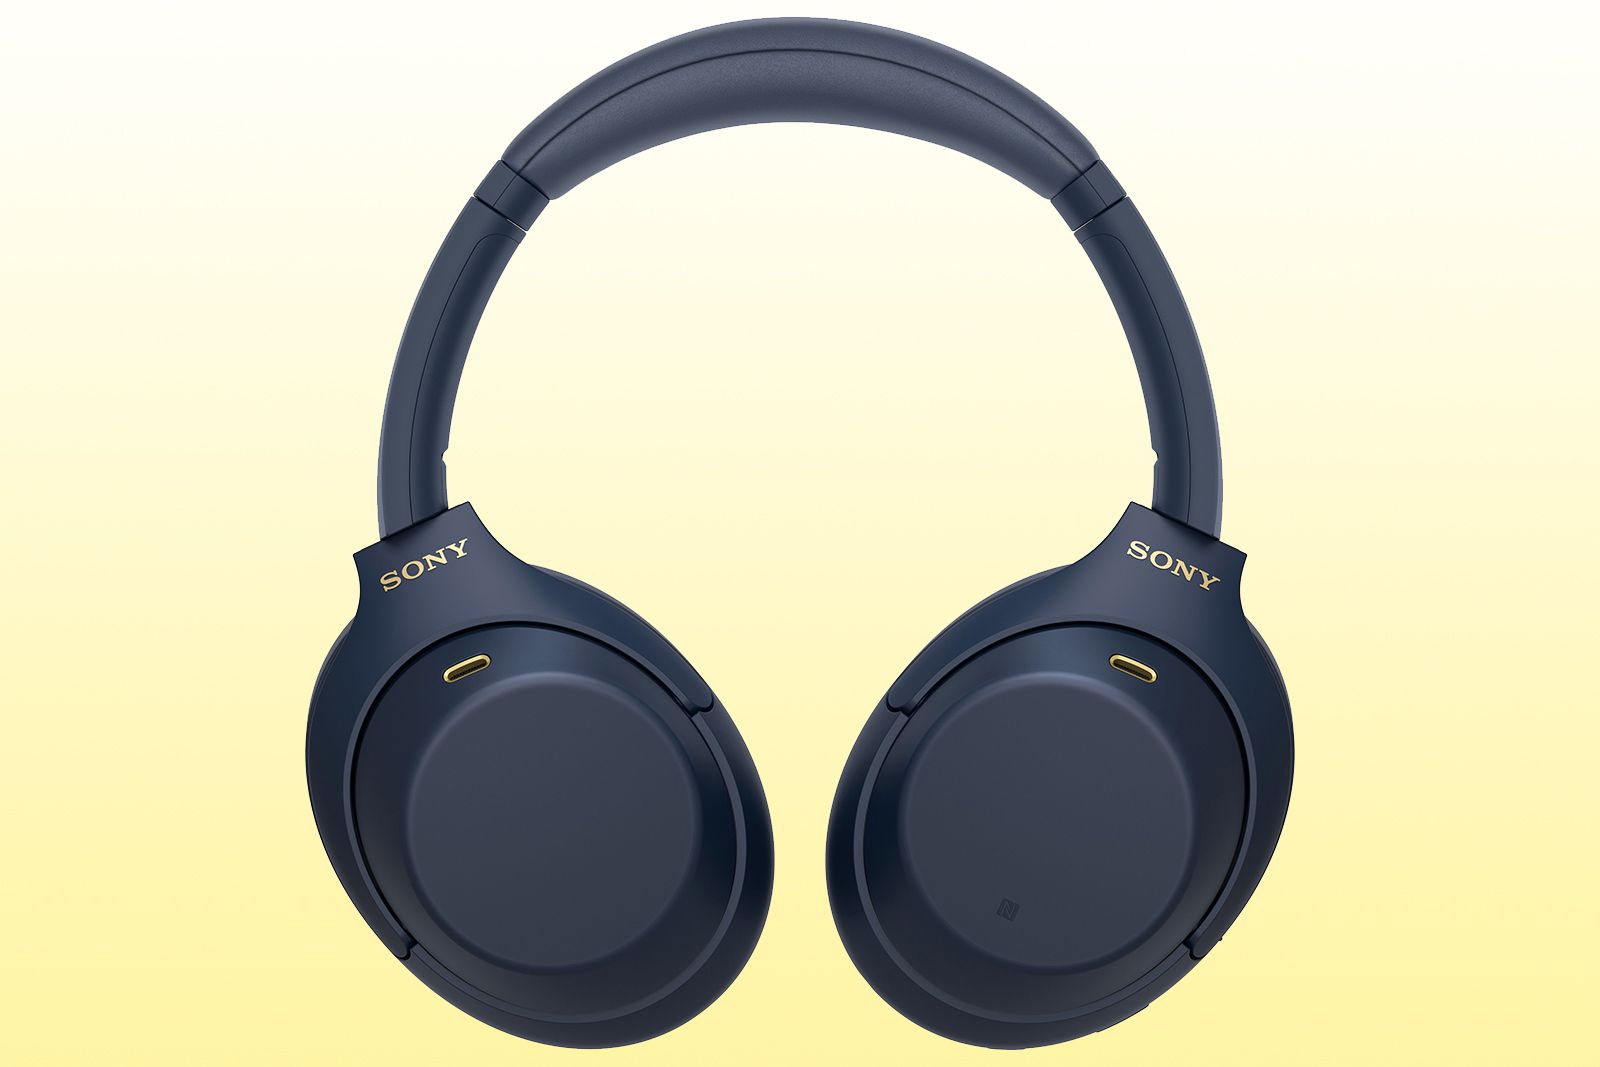 Sony WH-1000XM4 headphones look great in new midnight blue colourway photo 1